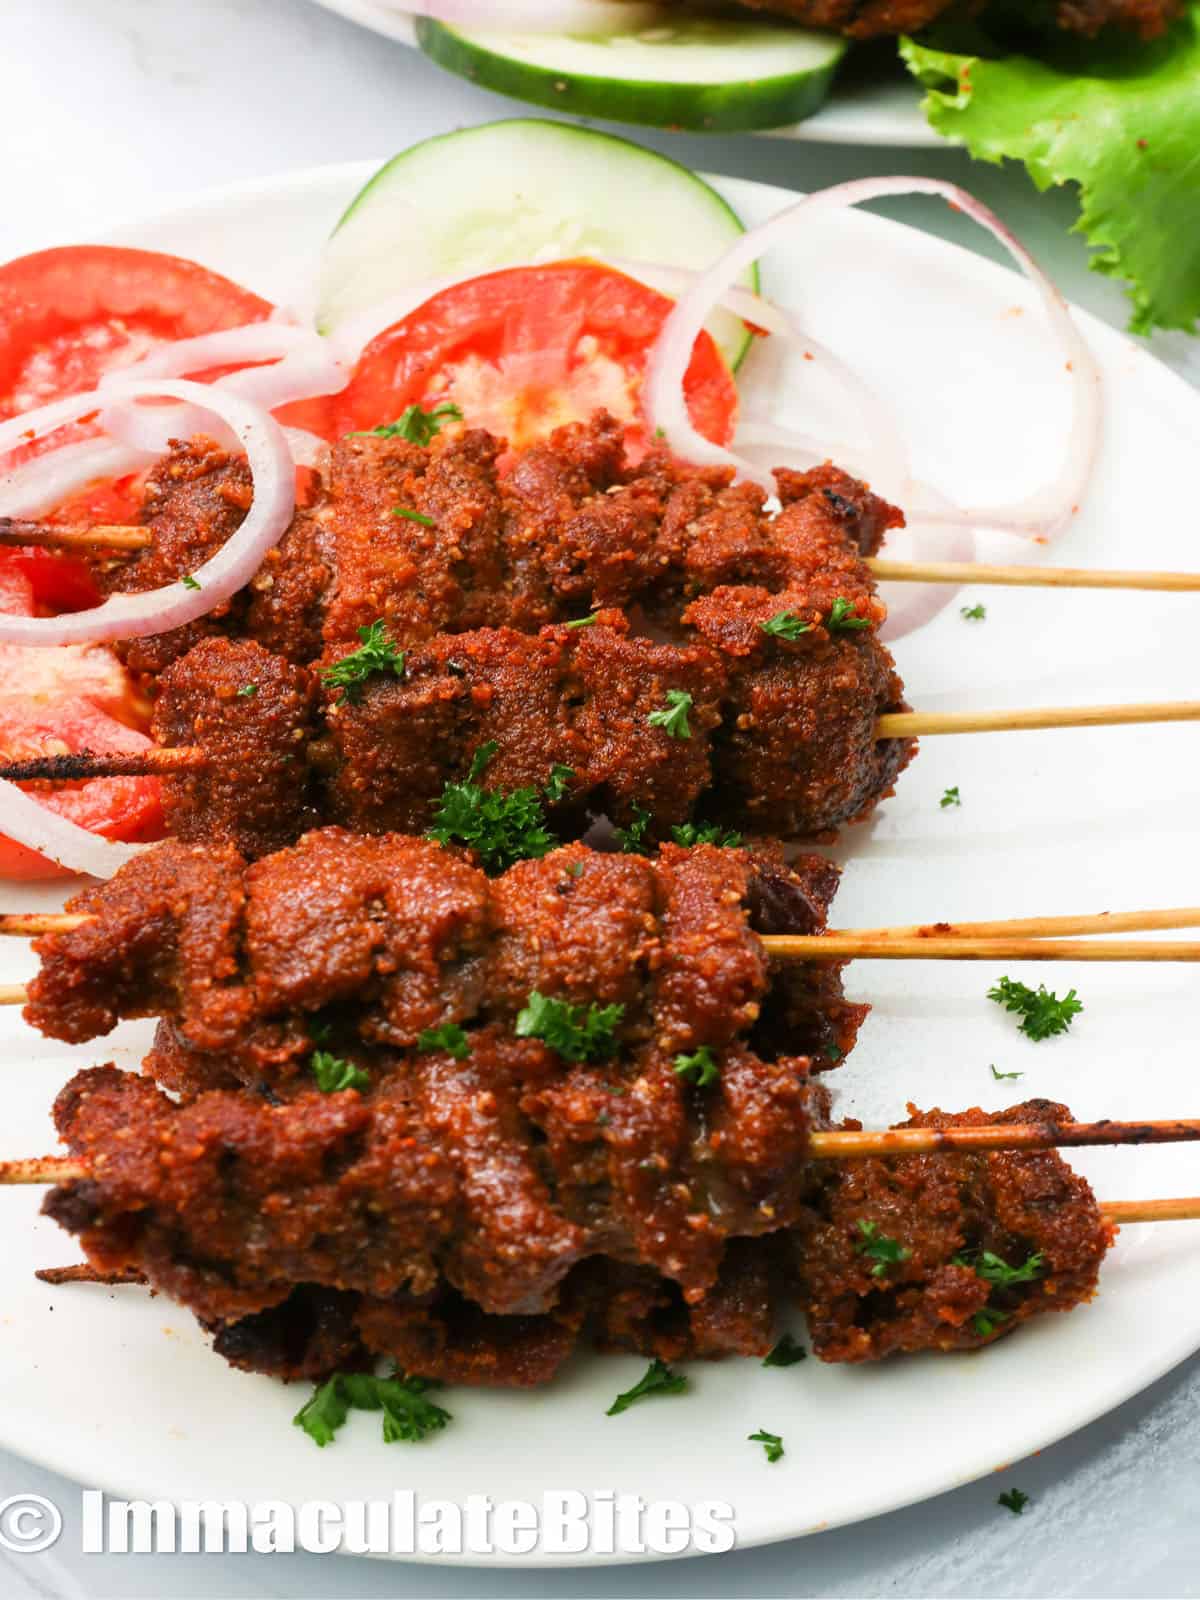 https://www.africanbites.com/wp-content/uploads/2022/03/a-plate-of-stacked-suya-beef-copy.jpg